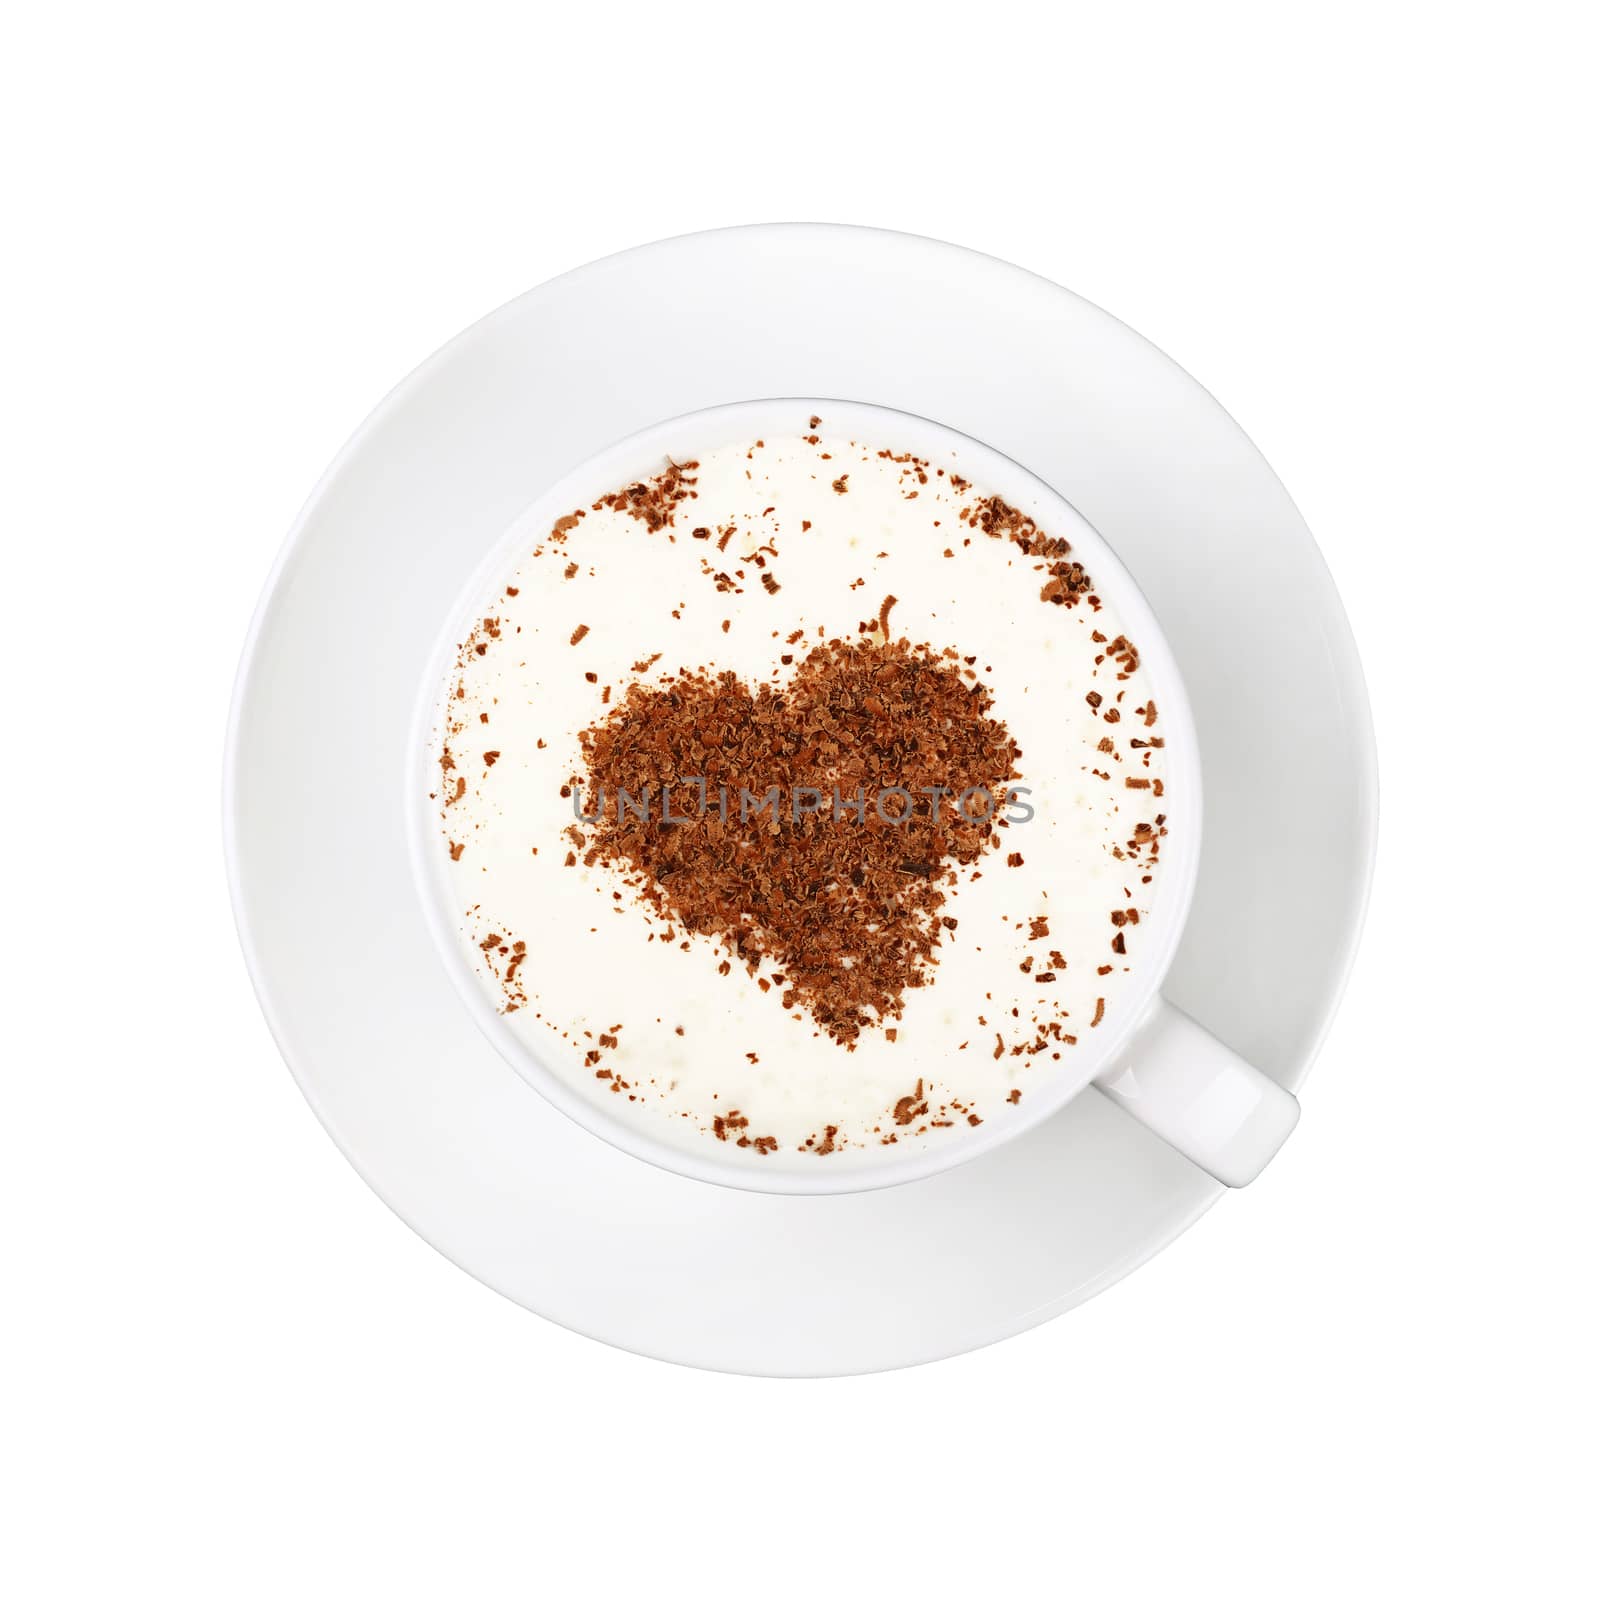 Close up one full white cup of frothy latte cappuccino coffee with heart shaped brown chocolate art, on saucer isolated on white background, elevated top view, directly above